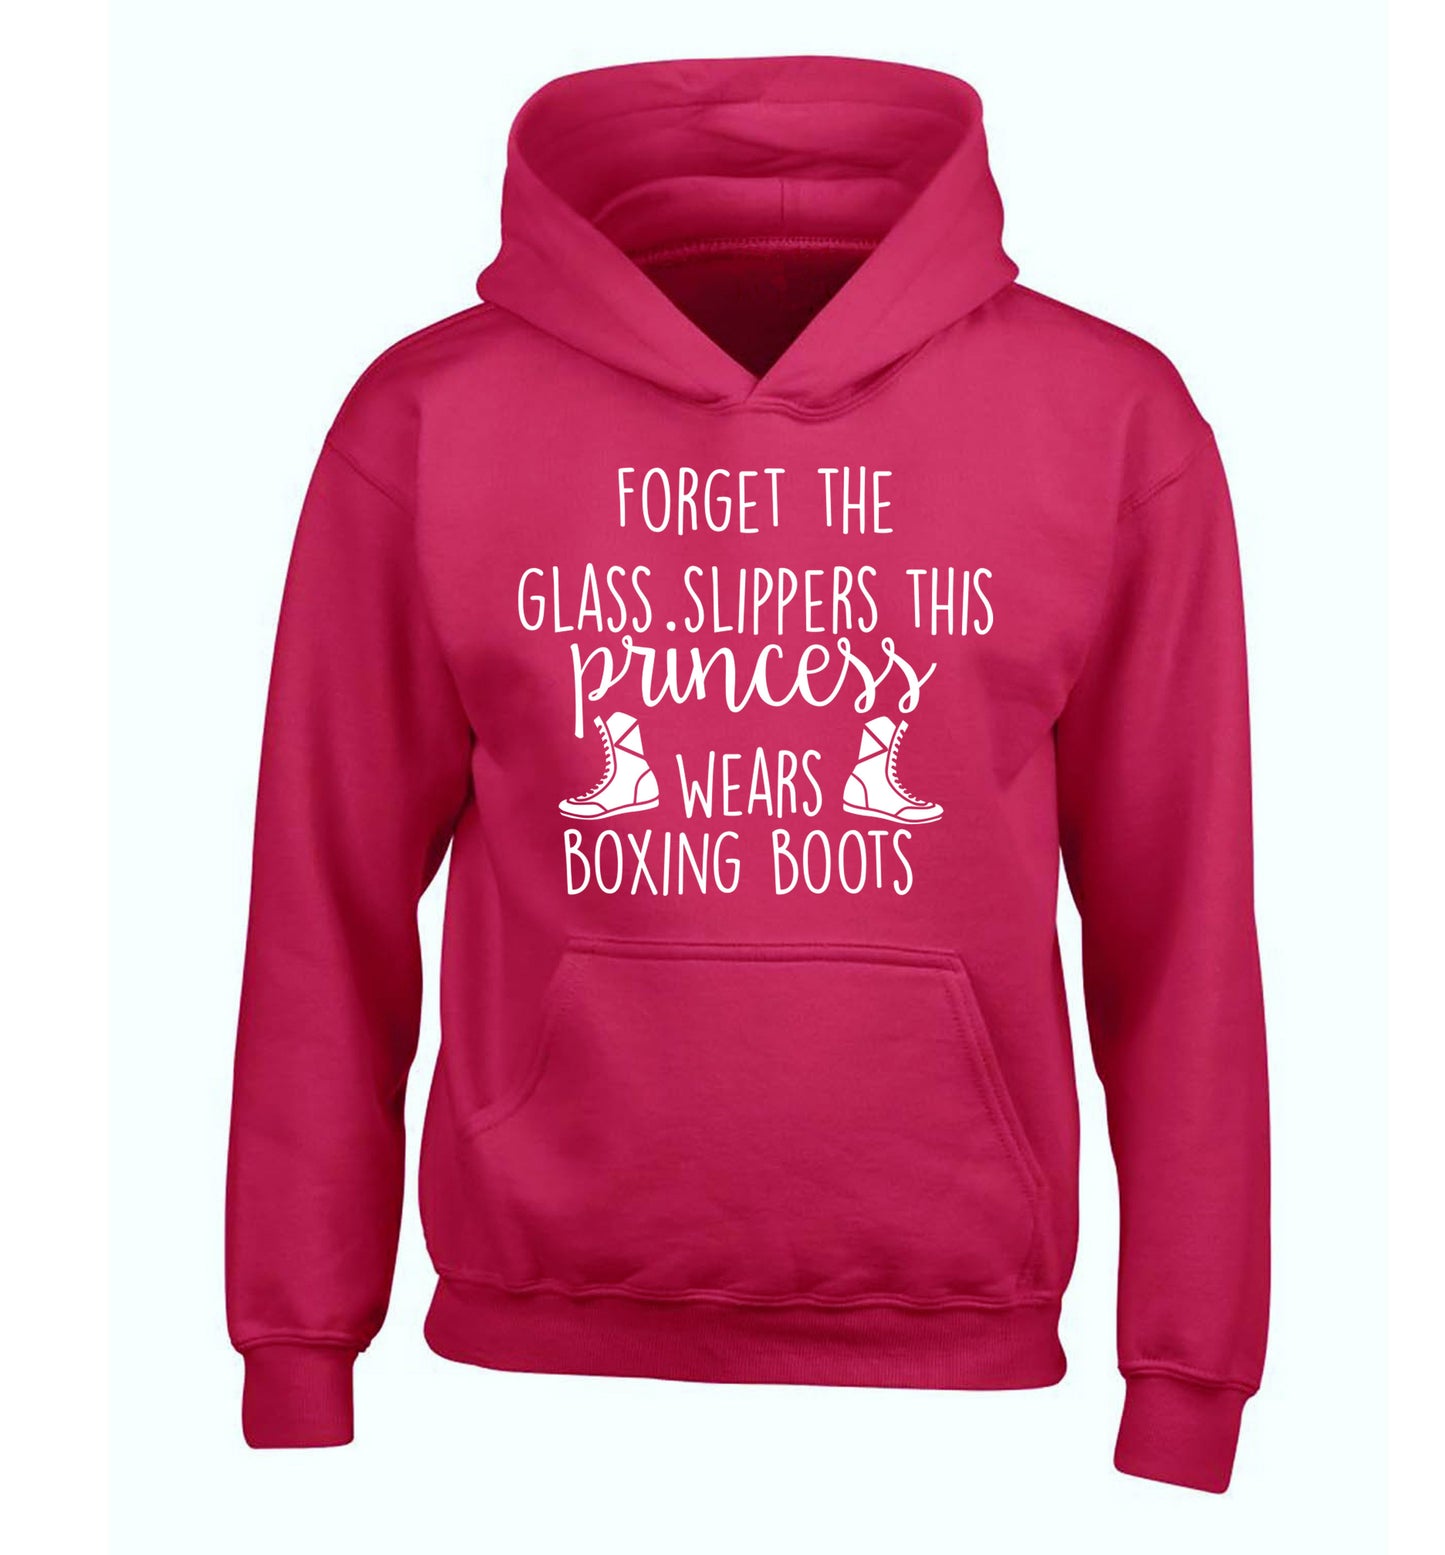 Forget the glass slippers this princess wears boxing boots children's pink hoodie 12-14 Years